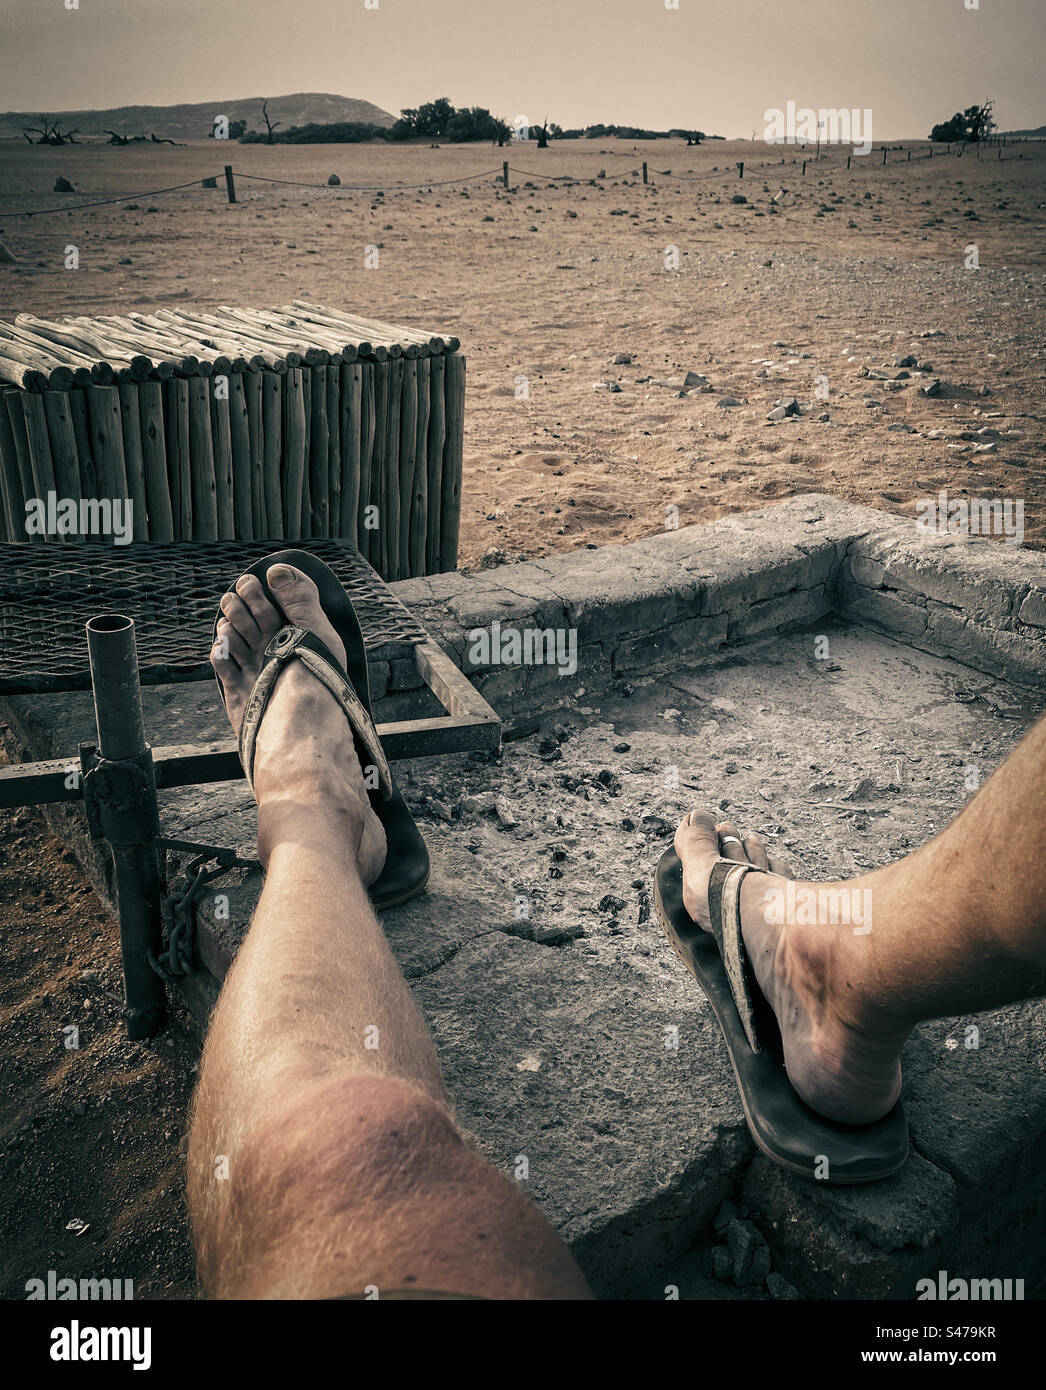 A man in sandals rests his legs on a bbq while relaxing as the sun goes down in Namibia Stock Photo